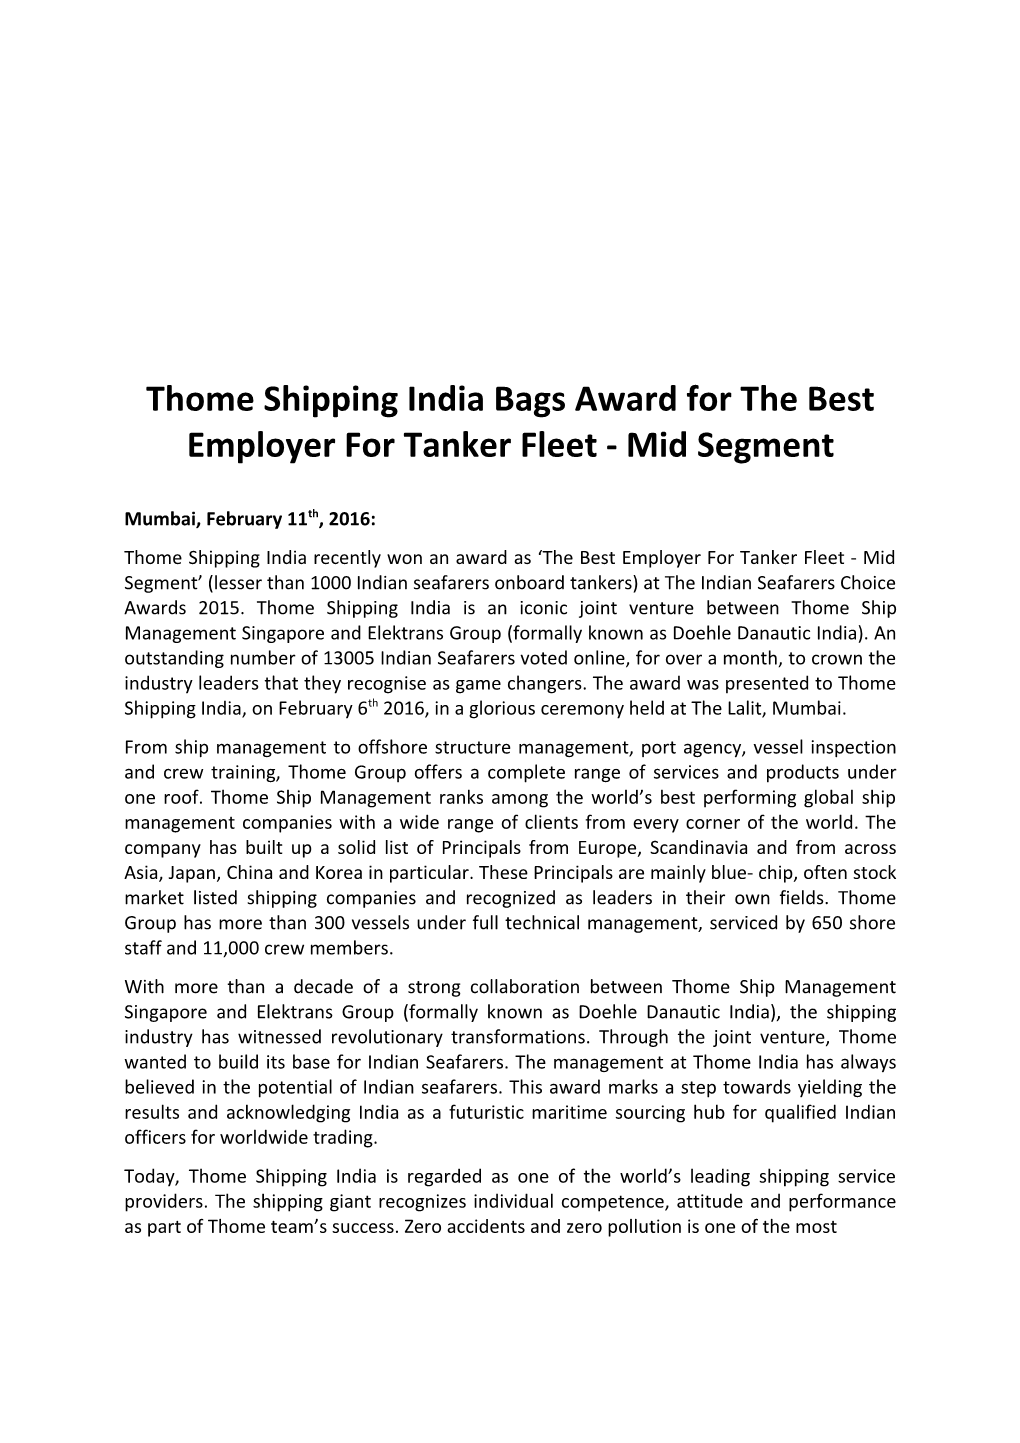 Thome Shipping India Bags Award for the Best Employer for Tanker Fleet - Mid Segment